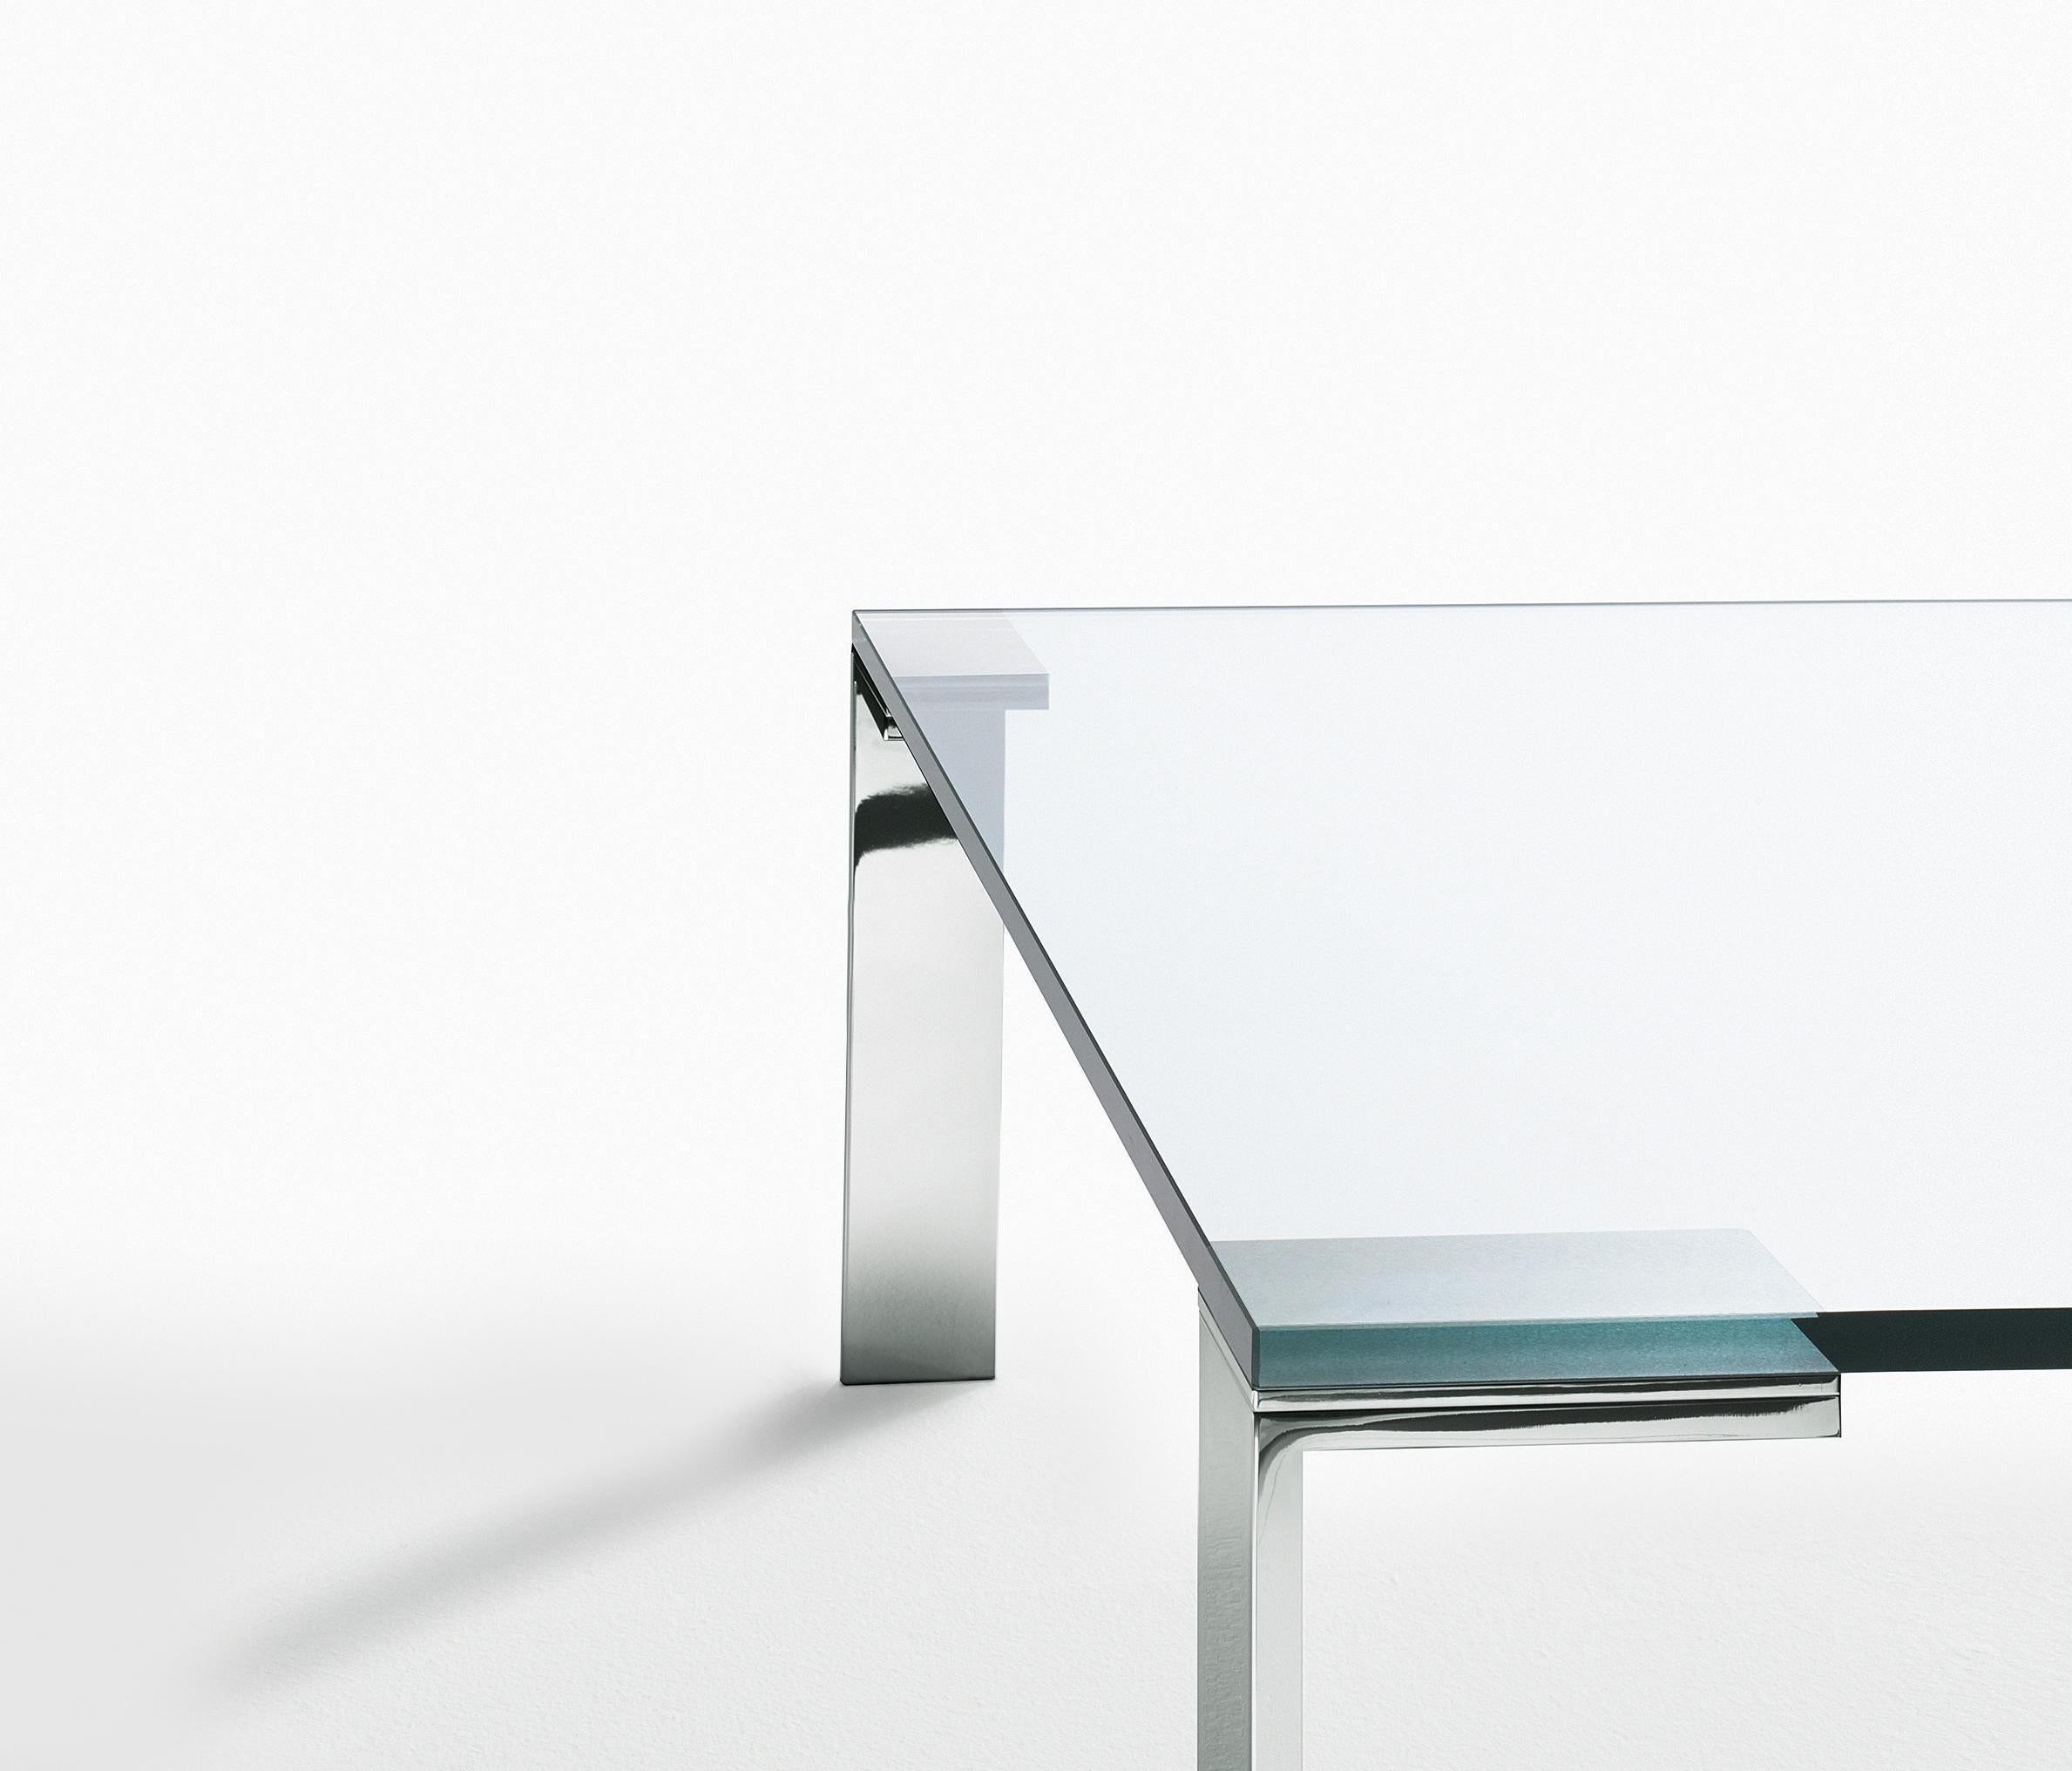 Like glass coffee table with clear top and polished legs. A sleek and modern addition to any living room or shared space. Designed by Arik Levy in 2004.

Dimensions: 60